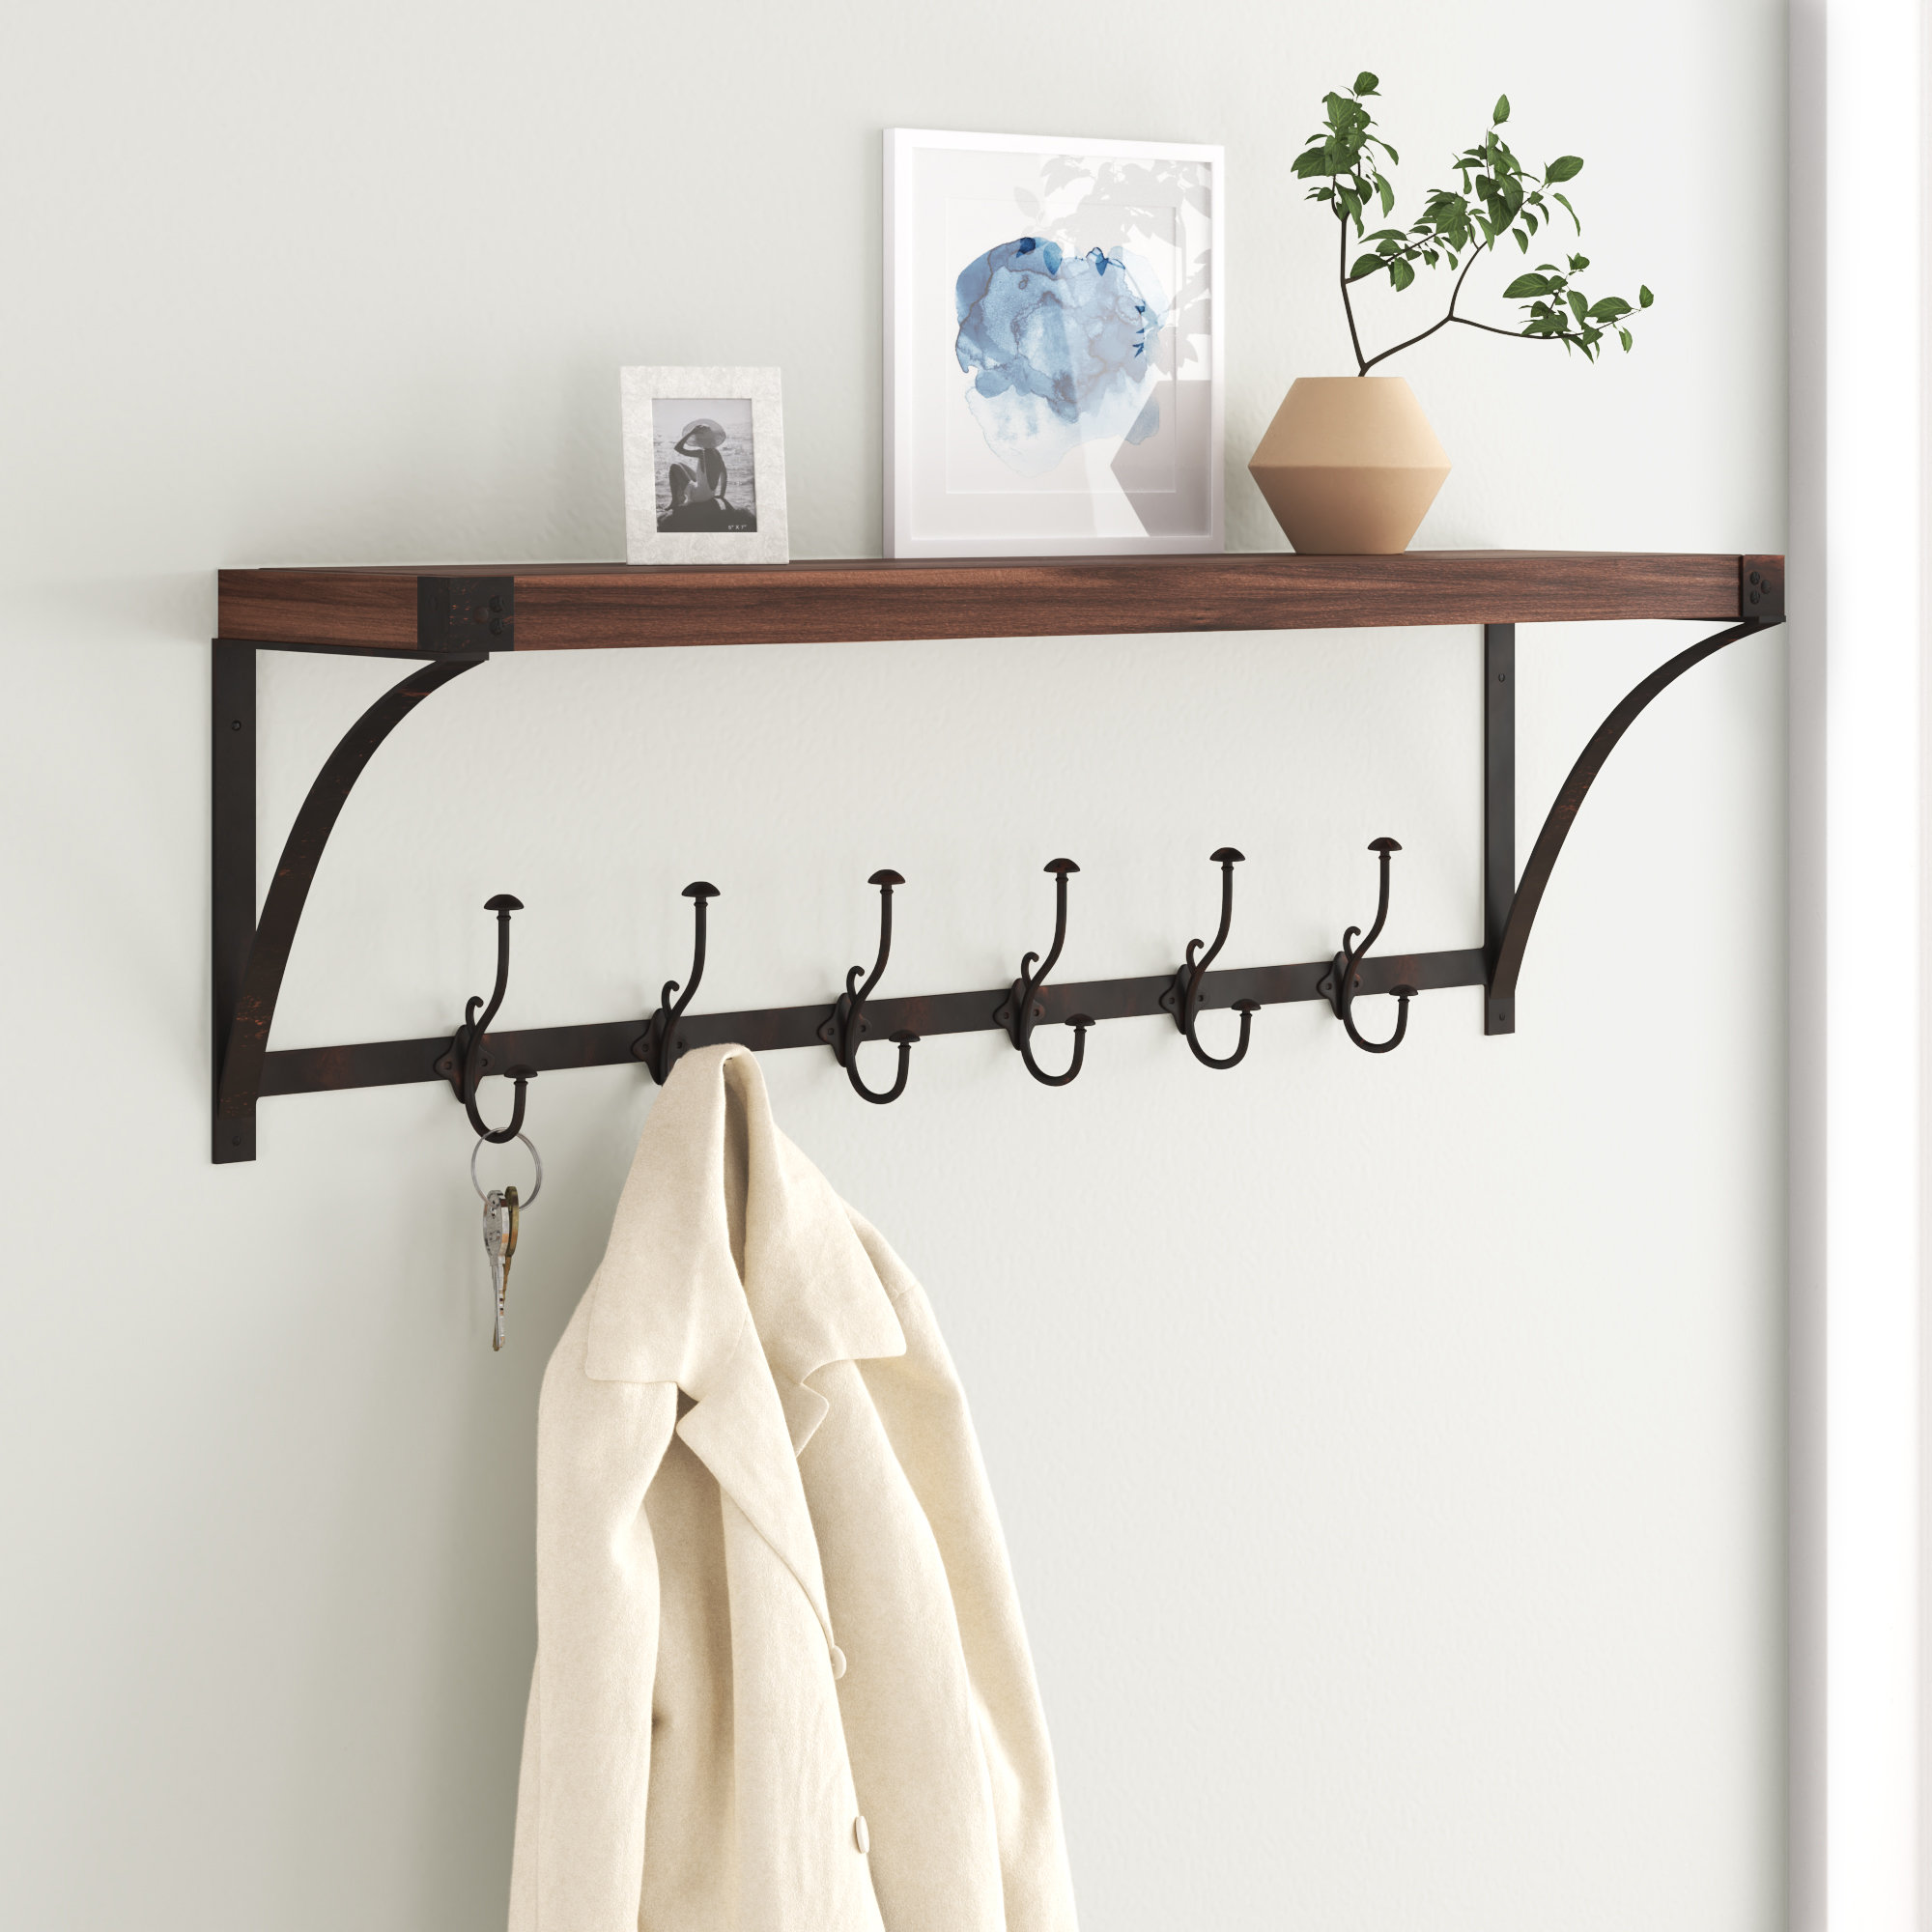 Buy Decorative Cast Iron Wall Hook Rack, Vintage Design Hanger with 4 Hooks, For Coats, Hats, Keys, Towels, Clothes, Aprons etc, Wall Mounted